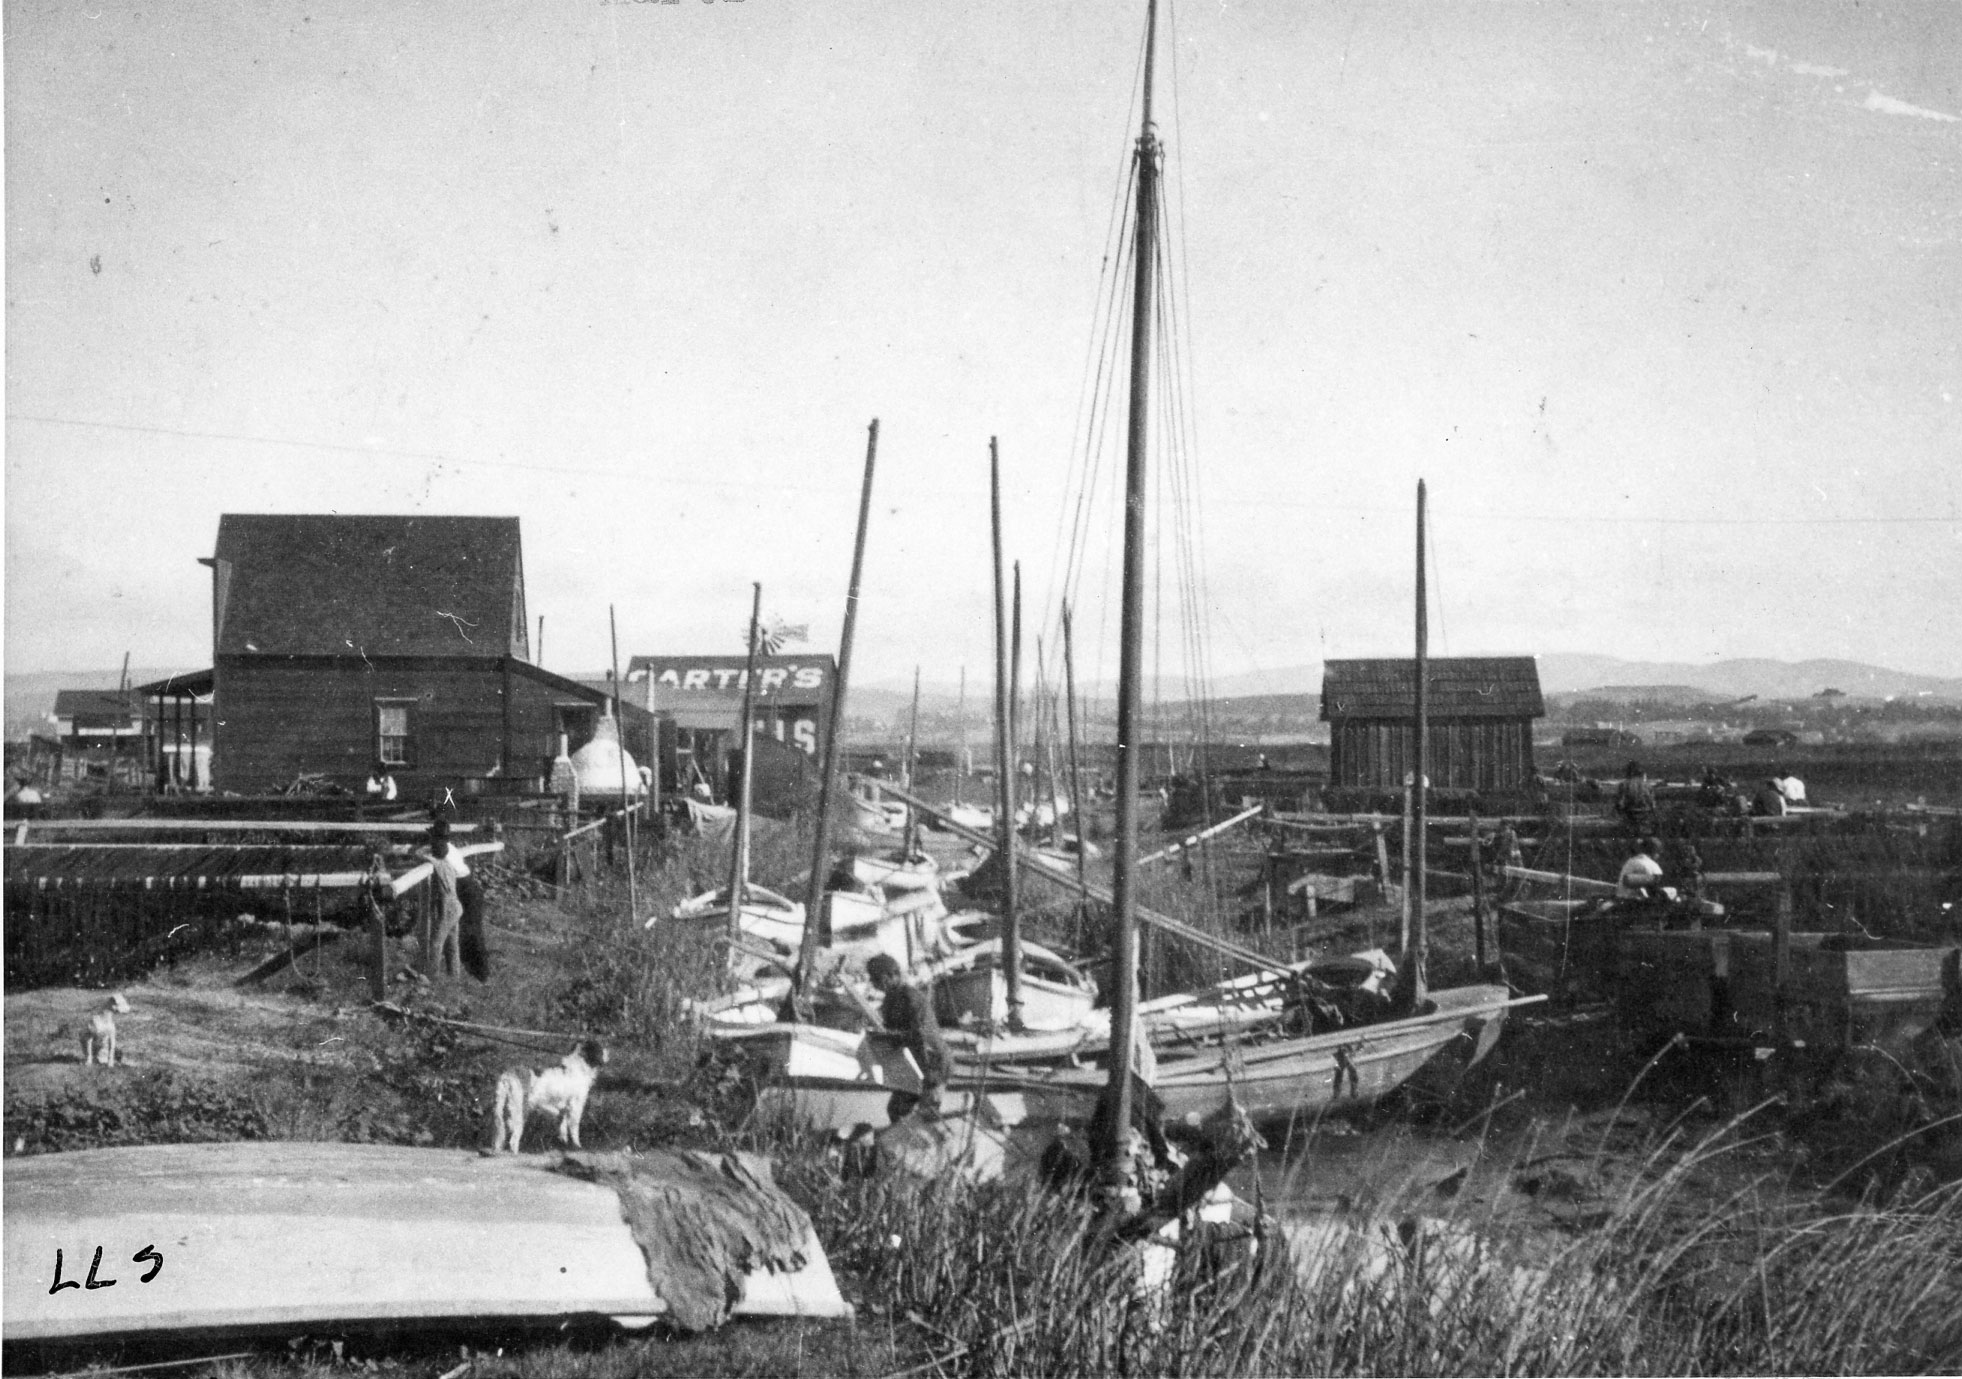 Black and white photo of fishing boats tied up in a creek with rustic buildings built in a marshland.